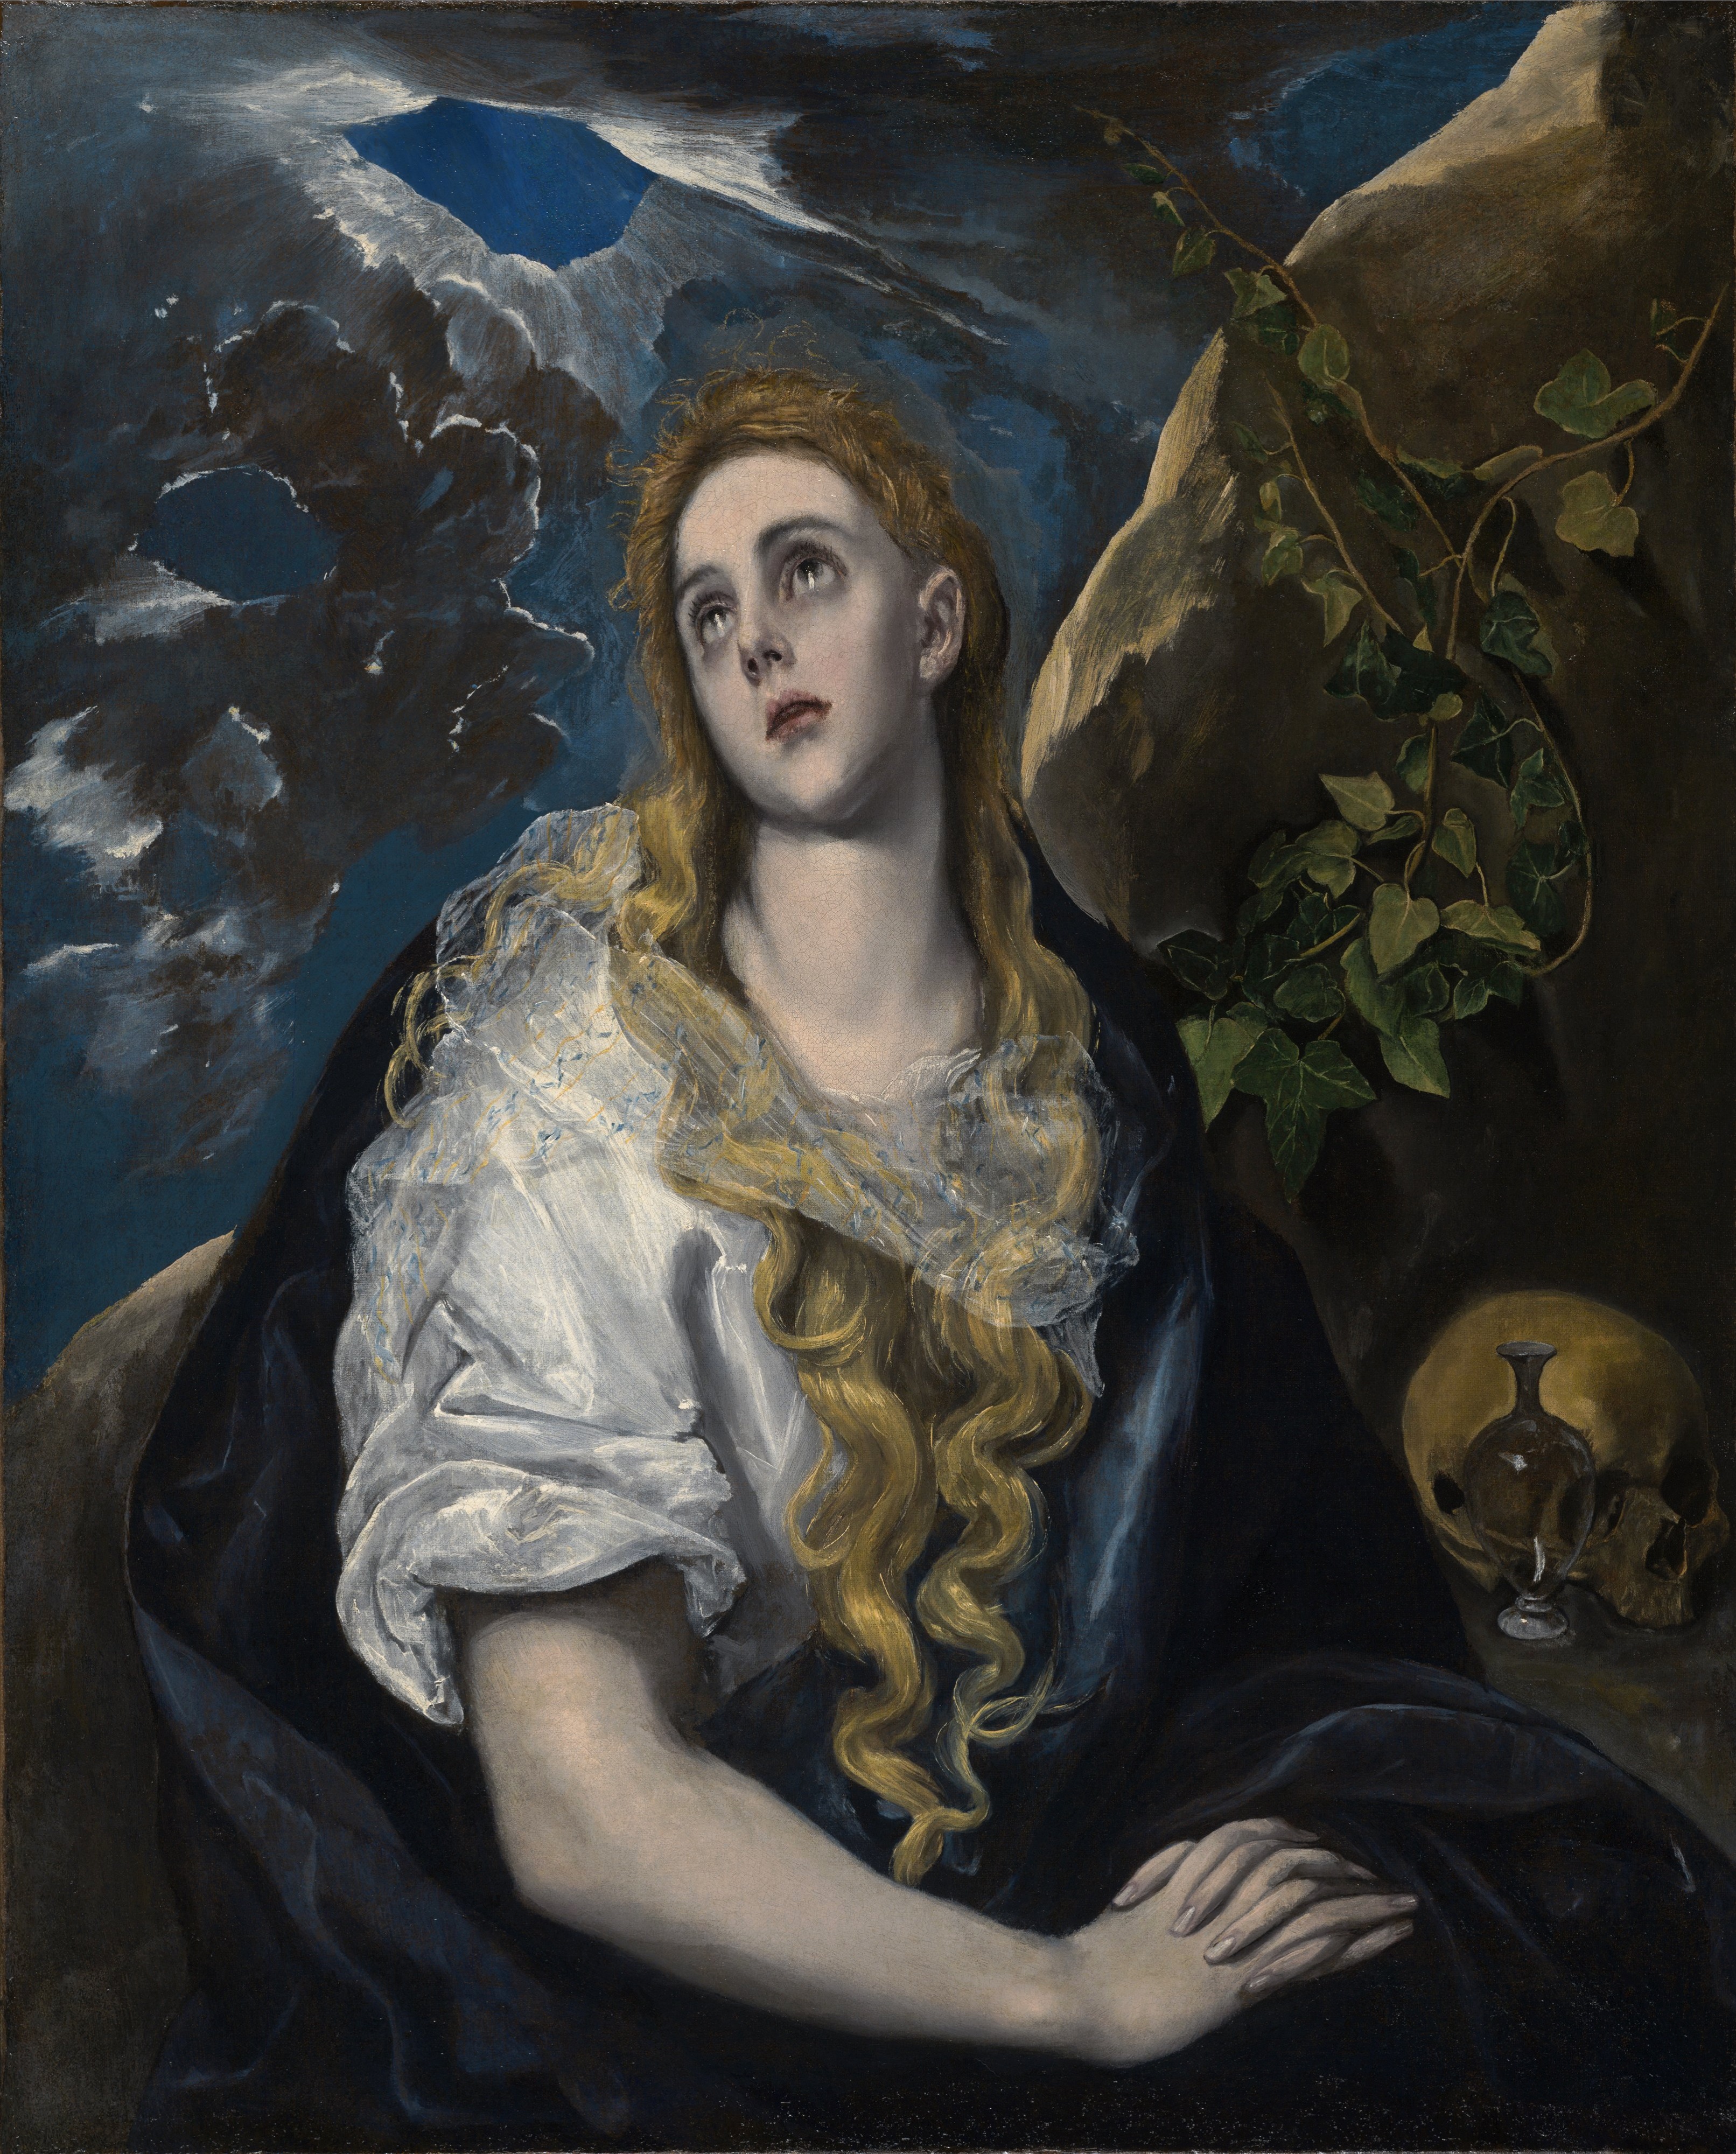 The Penitent Magdalene by El Greco - ca. 1580-1585 - 101.6 x 81.92 cm Nelson-Atkins Museum of Art